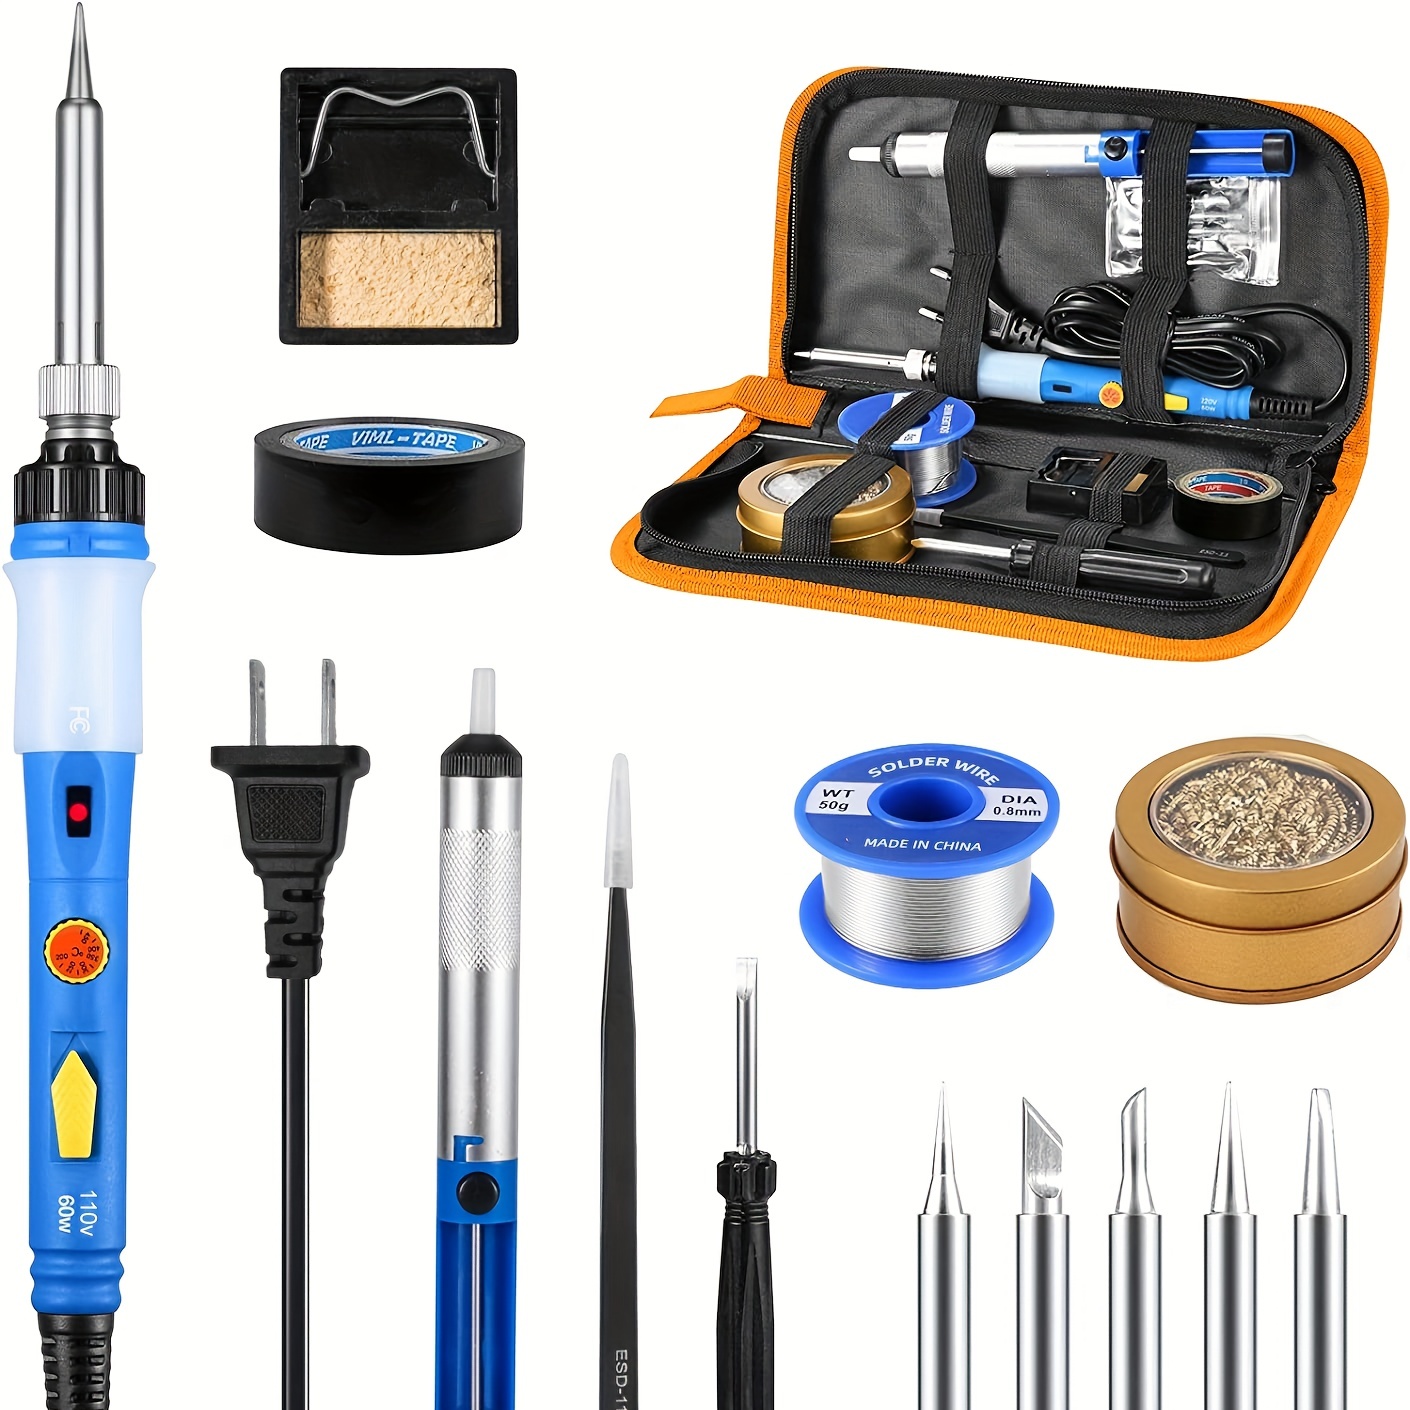 60W Portable Soldering Iron Kit with Ceramic Heater, 5 Tips, Stand, Solder  - For Metal, Jewelry, Electric Repair